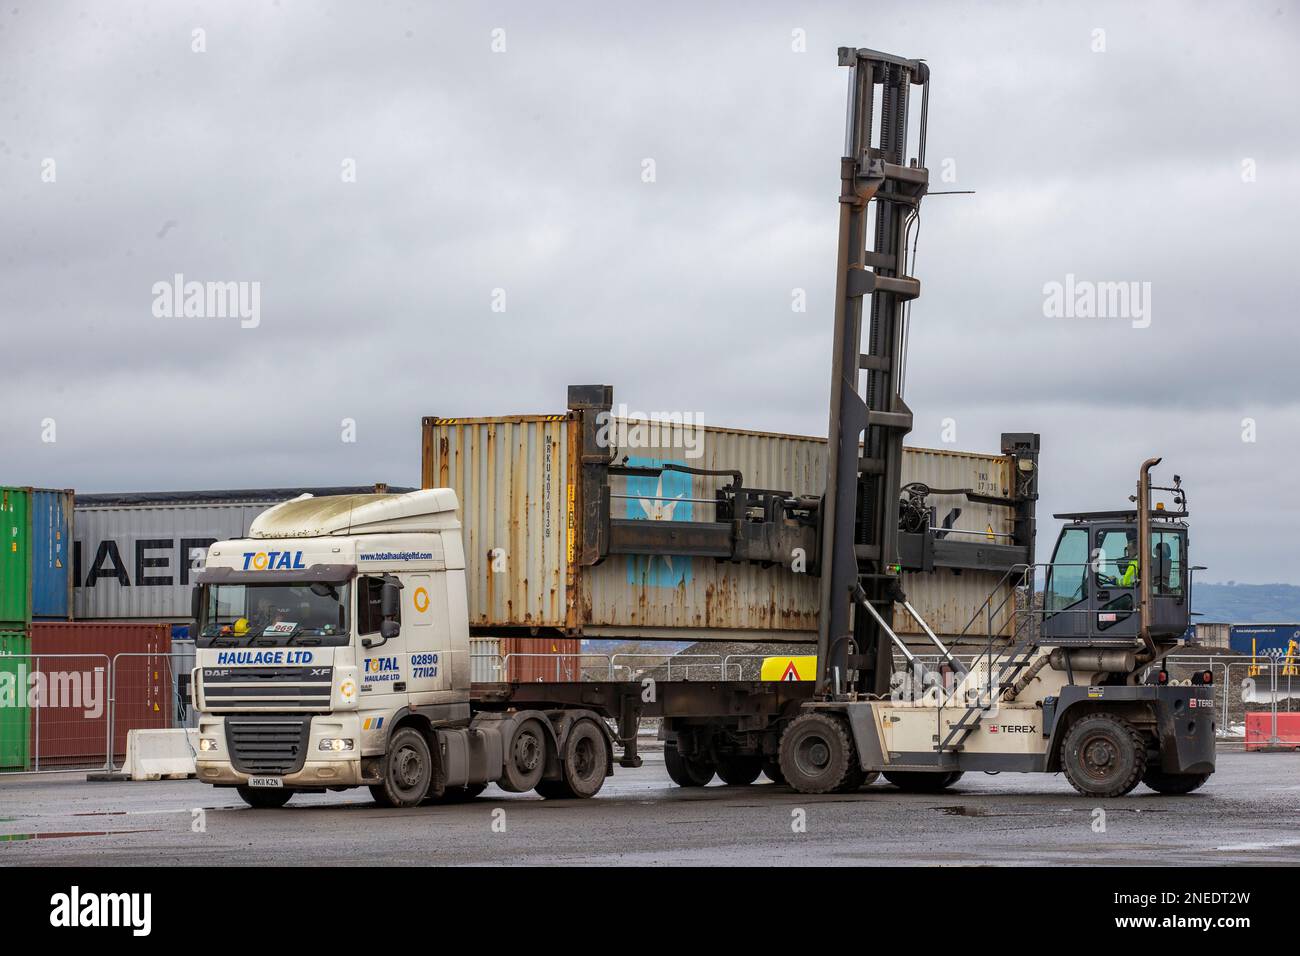 Container handler removes a shipping container from a lorry at the Port of Belfast. Any deal on the Northern Ireland Protocol that does not repair the 'constitutional damage' it has caused will fail to convince the DUP to return to powersharing, a senior party figure has warned. MP Sammy Wilson said the fundamental issue that needed confronting was the 'democratic deficit' created by Northern Ireland being subject to EU rules over which local politicians had no influence on. Stock Photo